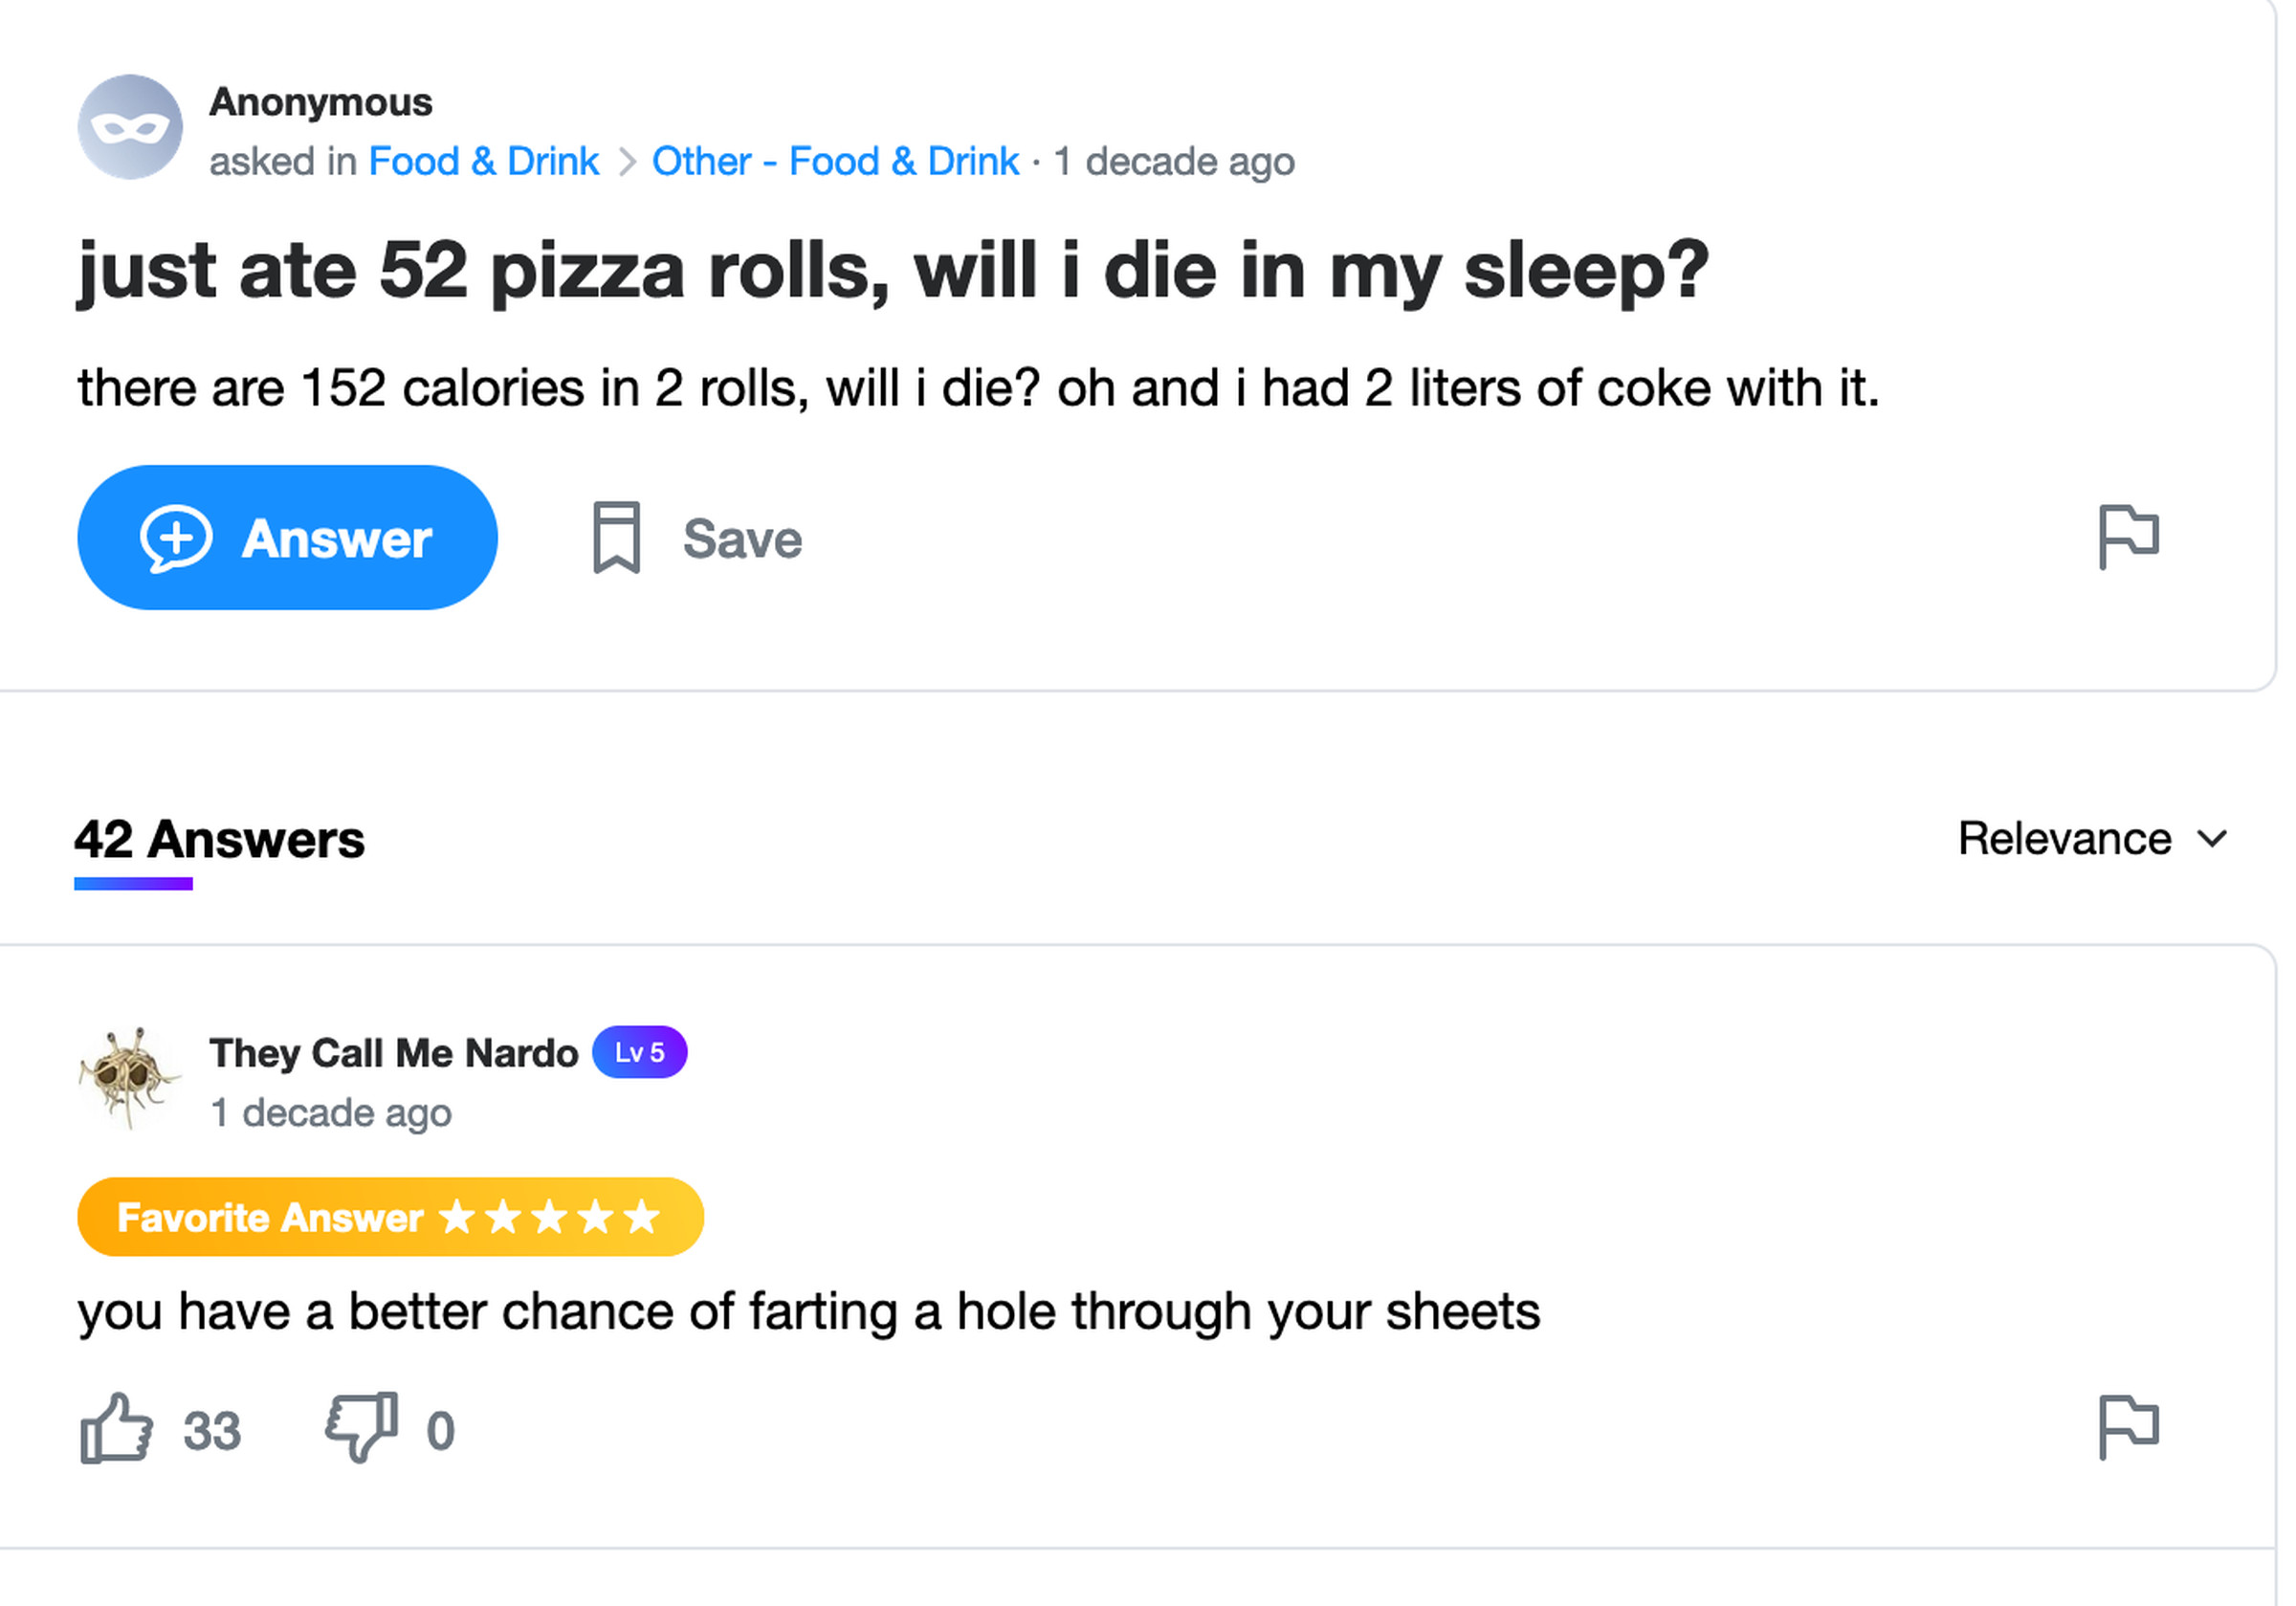 Yahoo Answers post: just ate 52 pizza rolls, will i die in my sleep? there are 152 calories in 2 rolls, will i die? oh and i had 2 liters of coke with it.